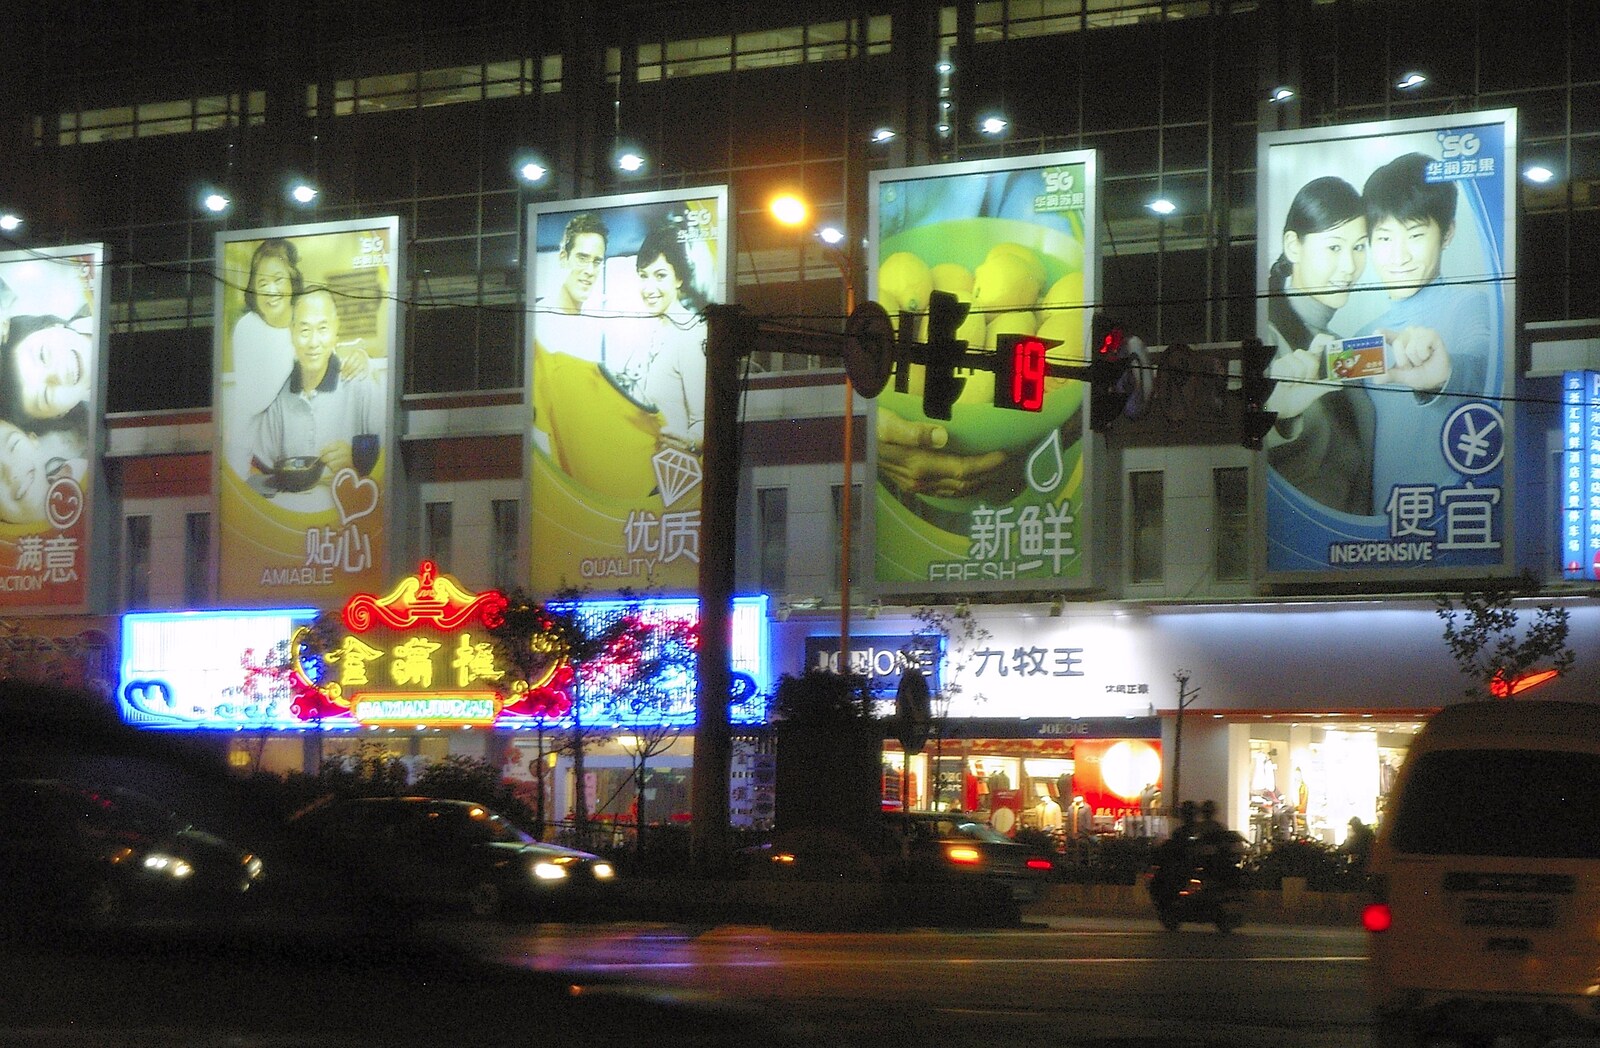 Sales posters and a traffic-light countdown from Nanjing by Night, Nanjing, Jiangsu Province, China - 4th October 2006